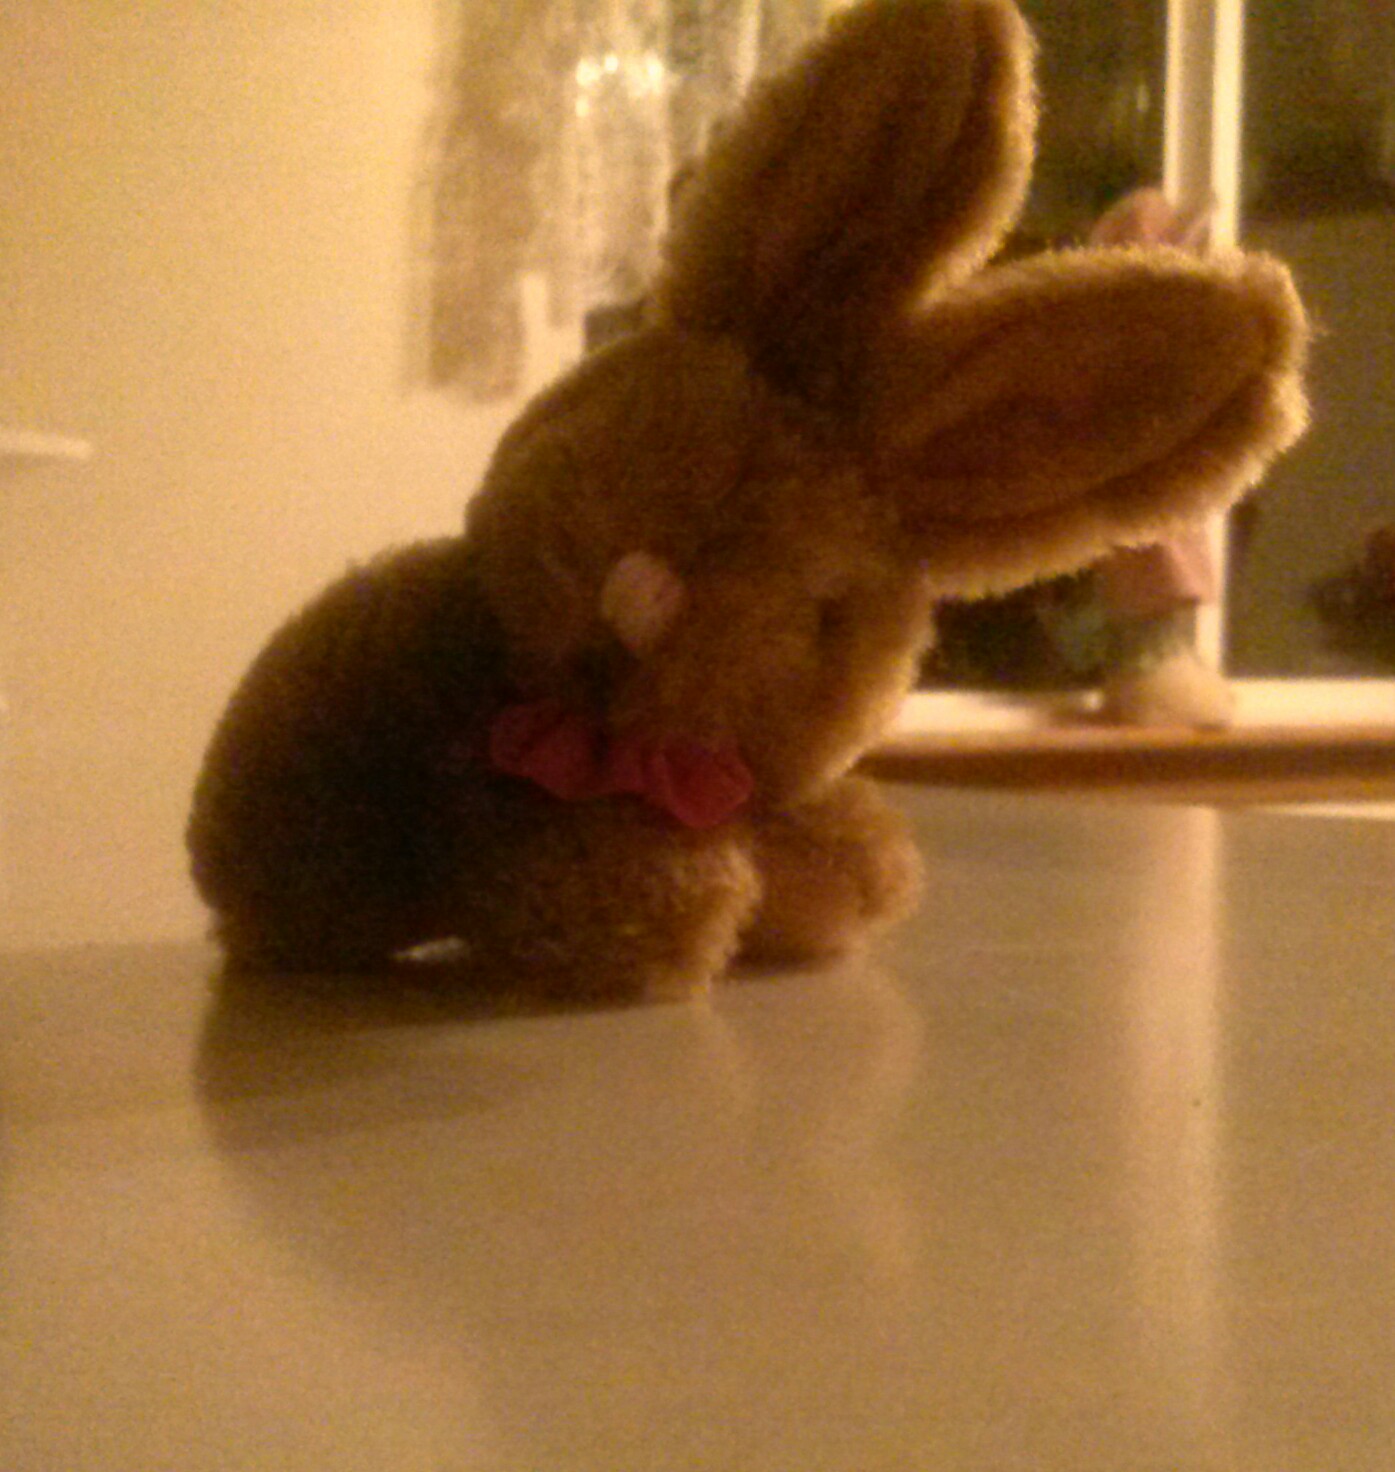 heres a bunny its a inch and a half tall